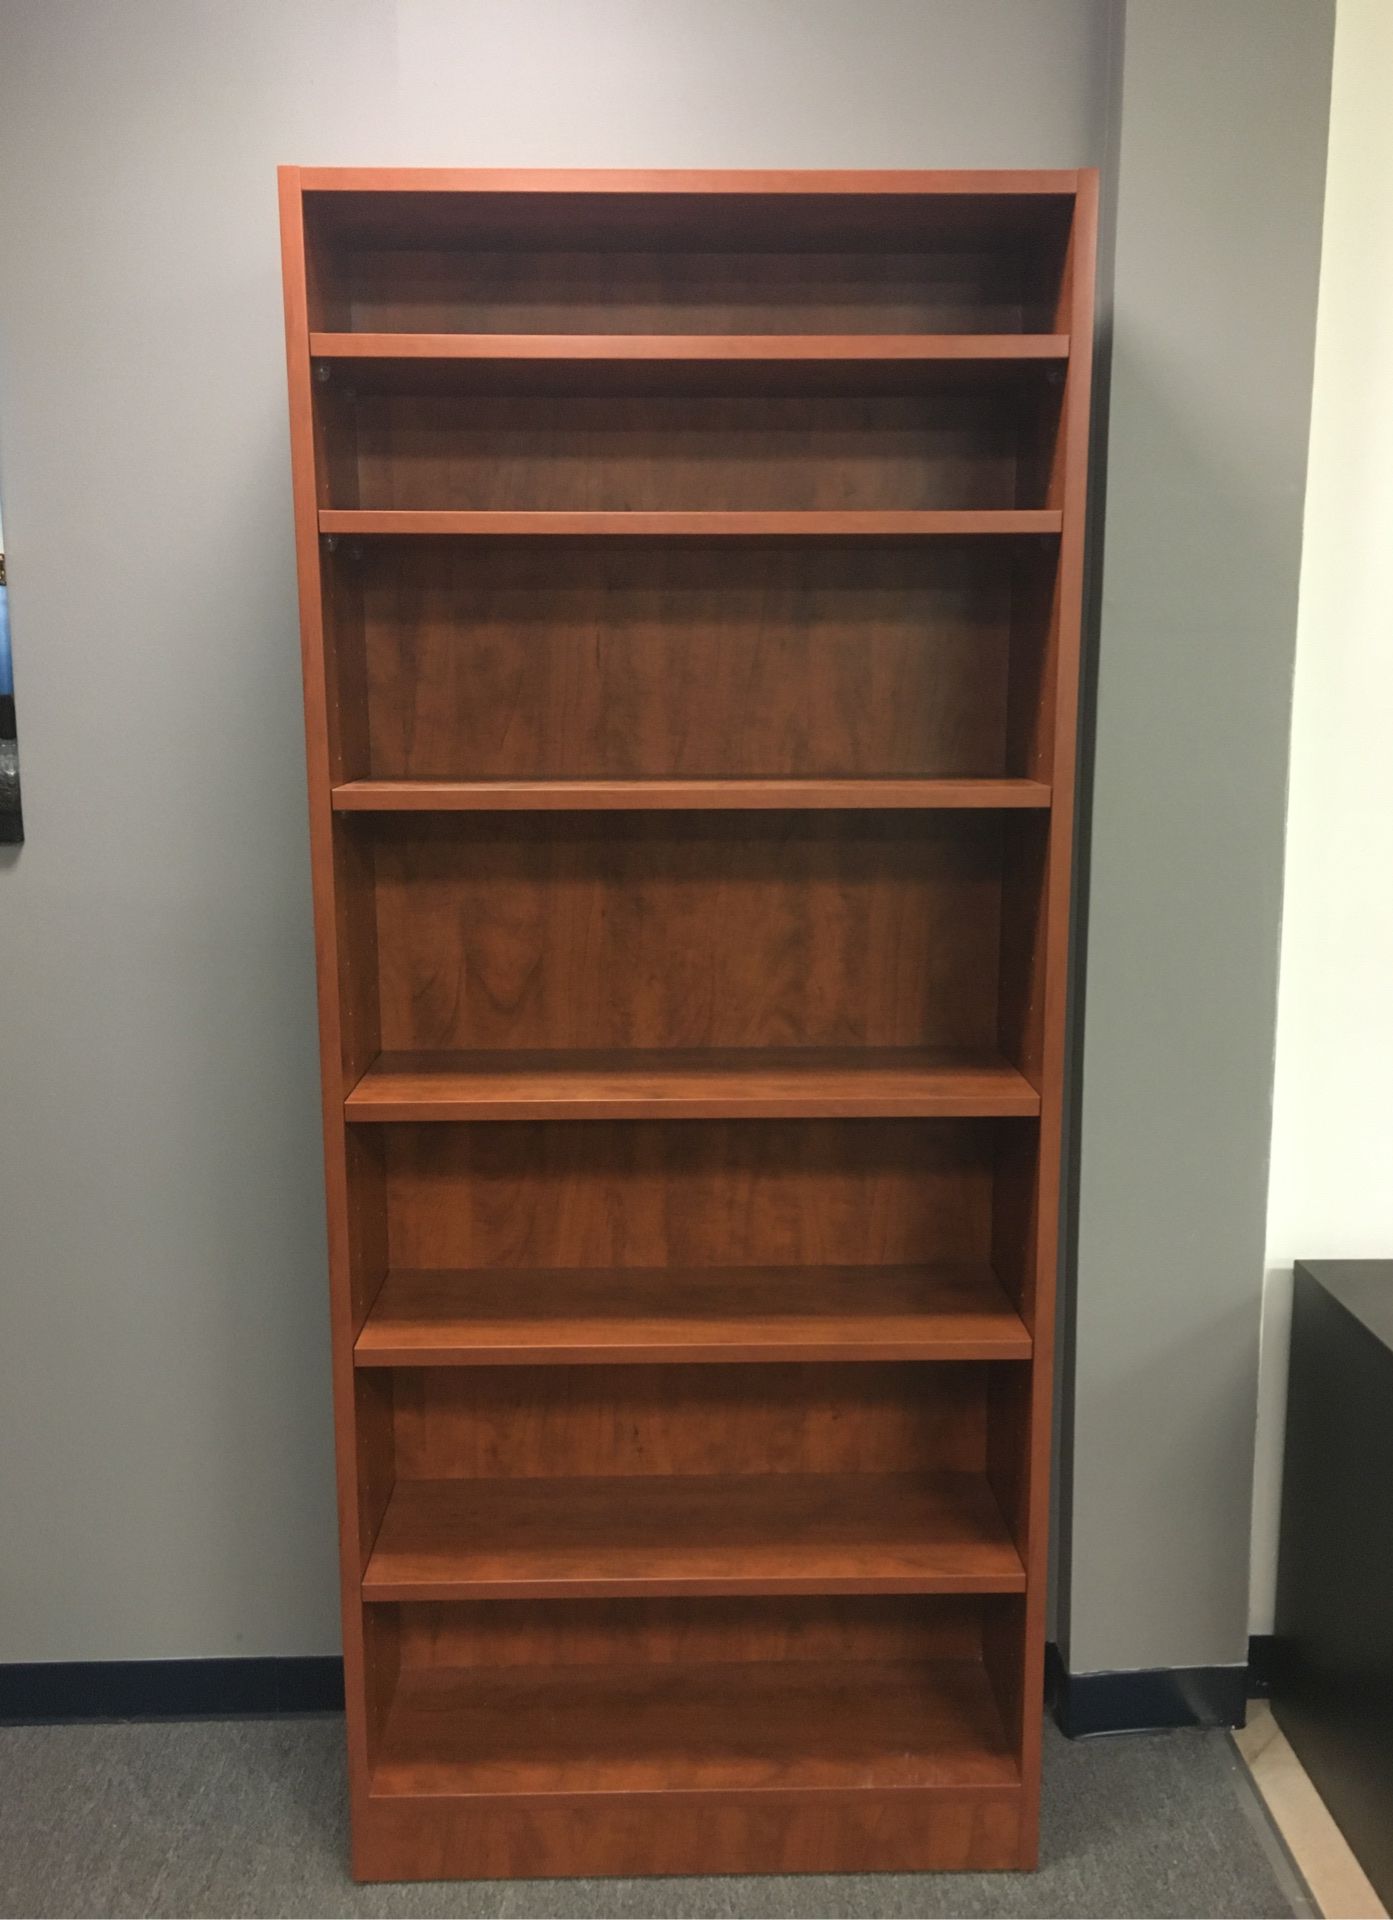 Large office bookcase for sale!